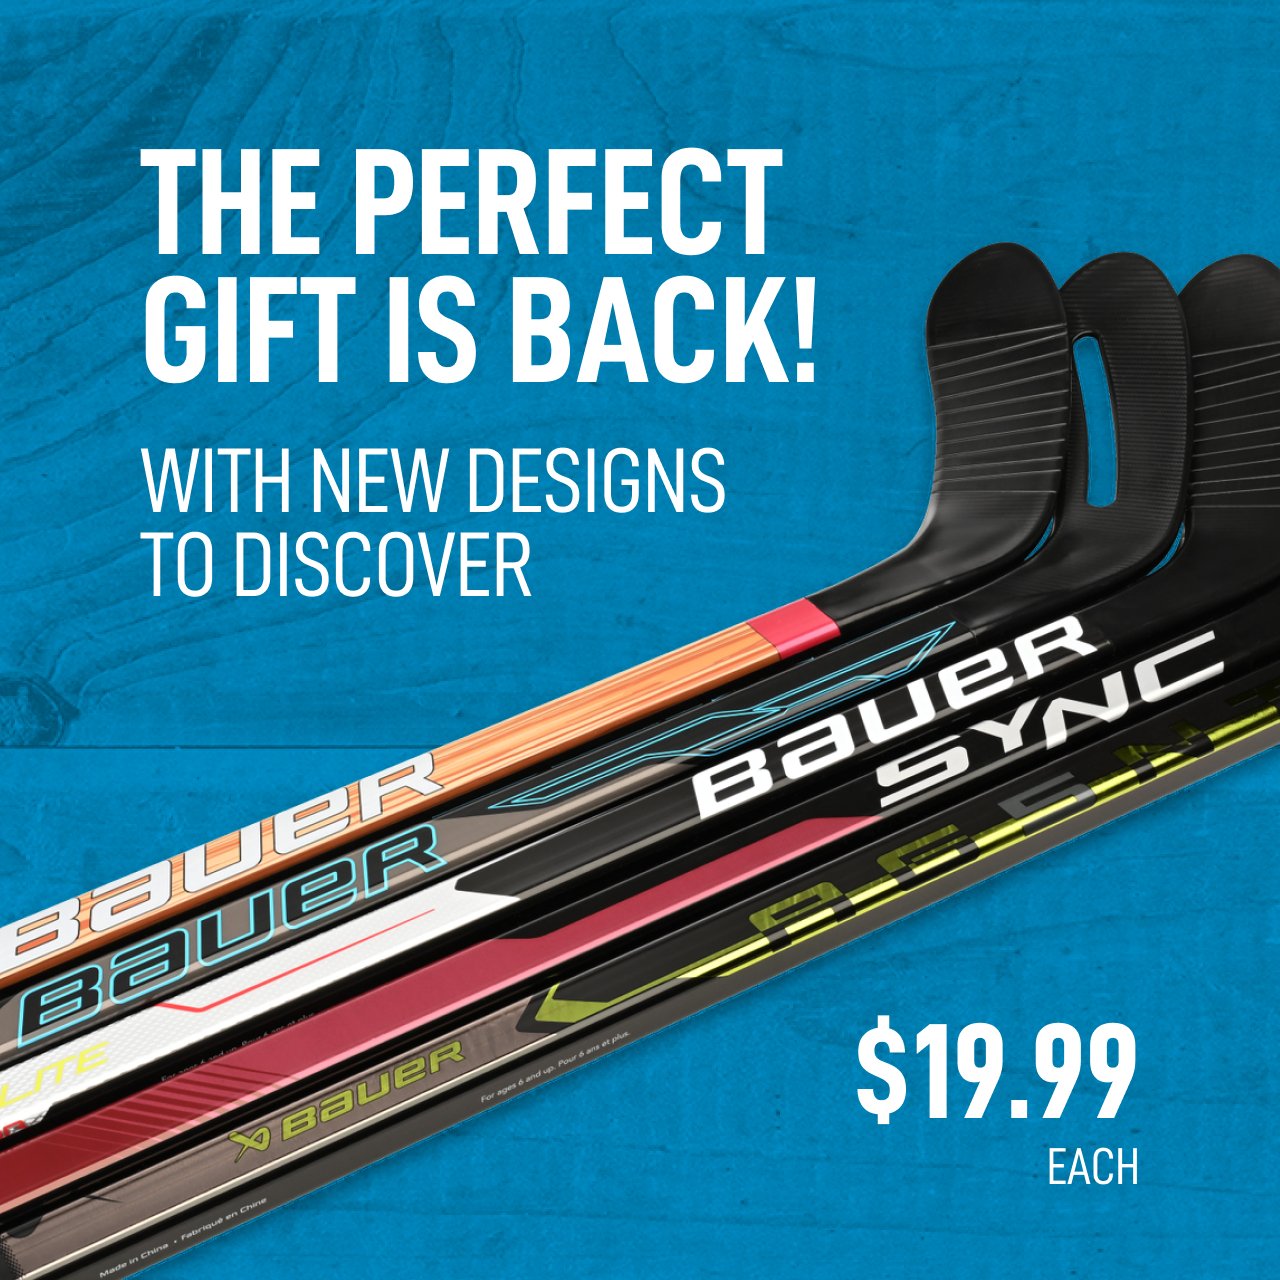 TSR Hockey/Lacrosse - Mystery Mini Sticks are back with 5 different stick  designs! SLING, HyperLite Kane, HyperLite Pettersson, GEO Pastrnak, and  Vapor XXX Lite! Which one would you be most excited to